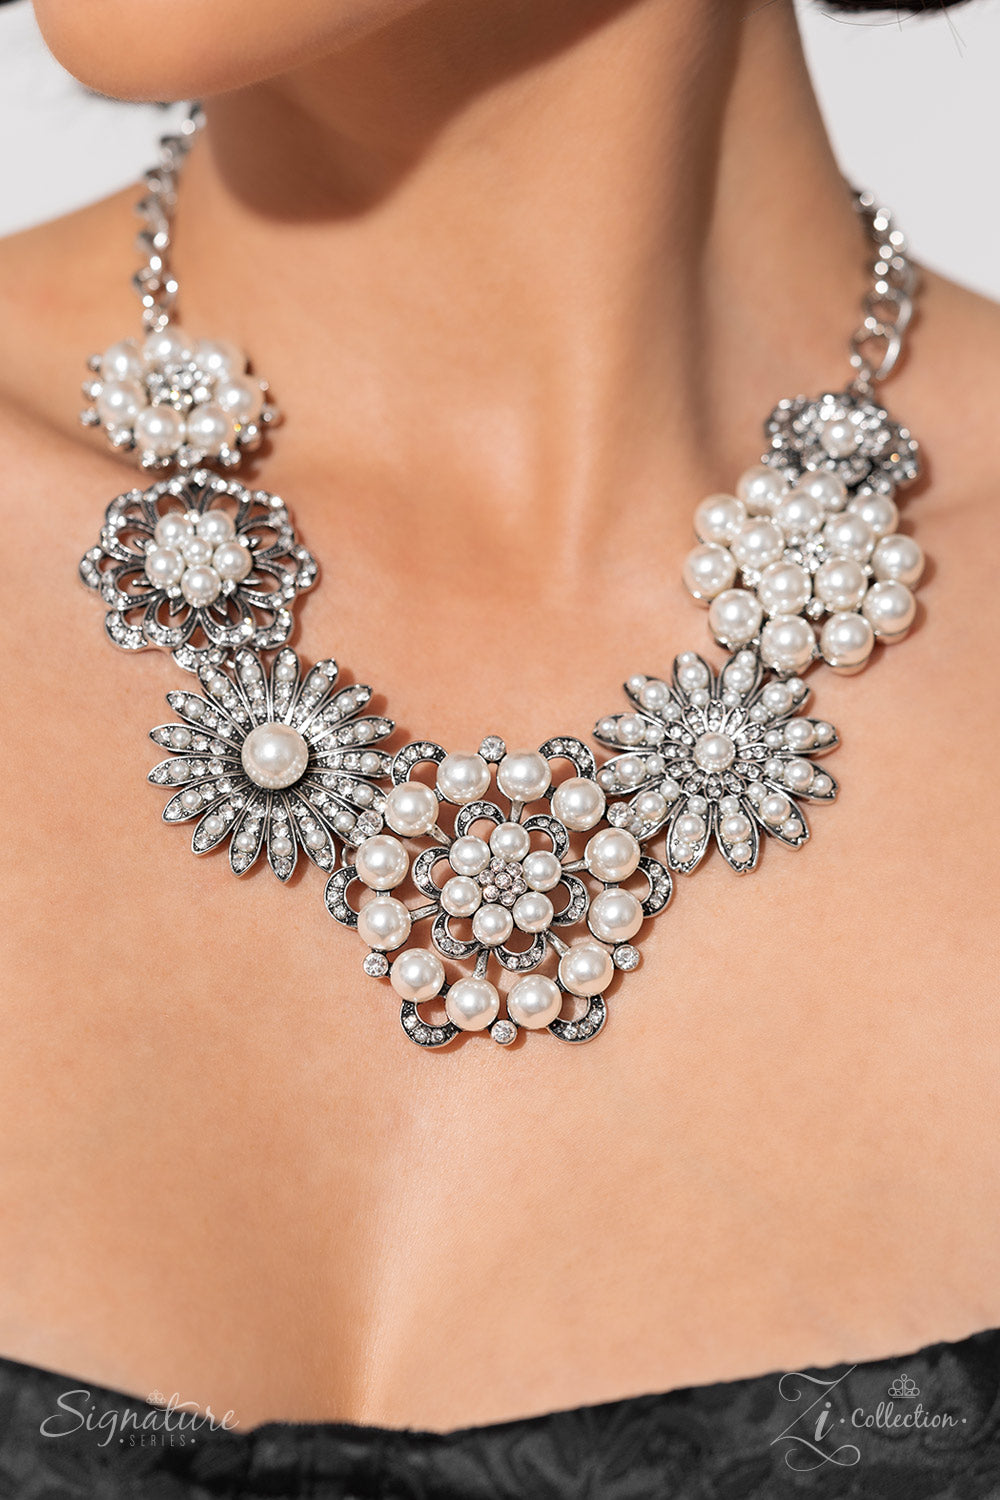 Paparazzi Accessories The Raven Polished white pearls and brilliant white rhinestones bloom atop a framework of silver, forming seven unique flowers adorned in dizzying detail. Each flower features a unique centerpiece encircled by silver petals lined wit